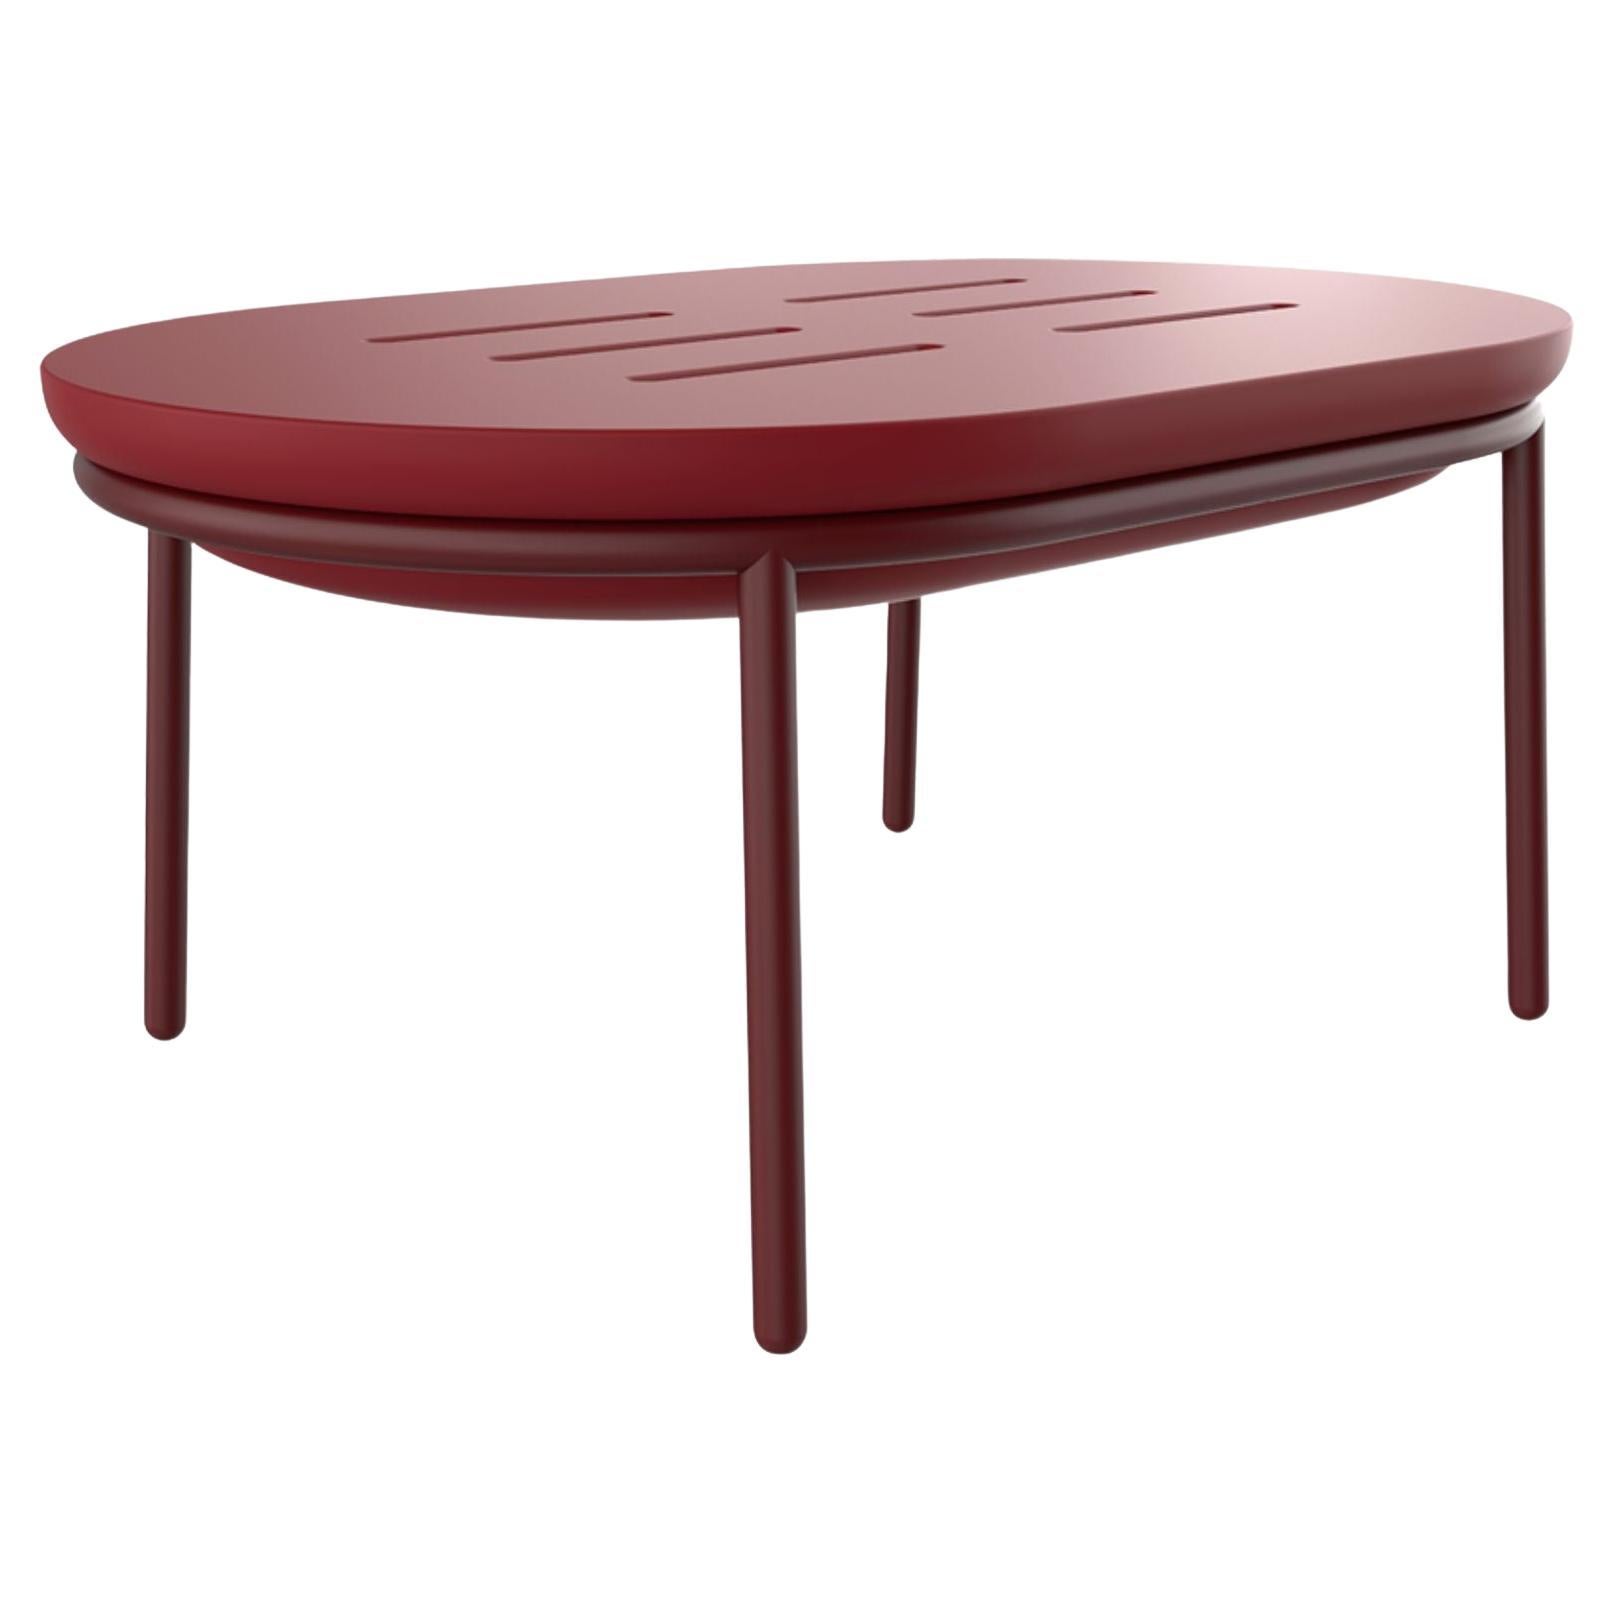 Lace Burgundy 90 Low Table by Mowee For Sale